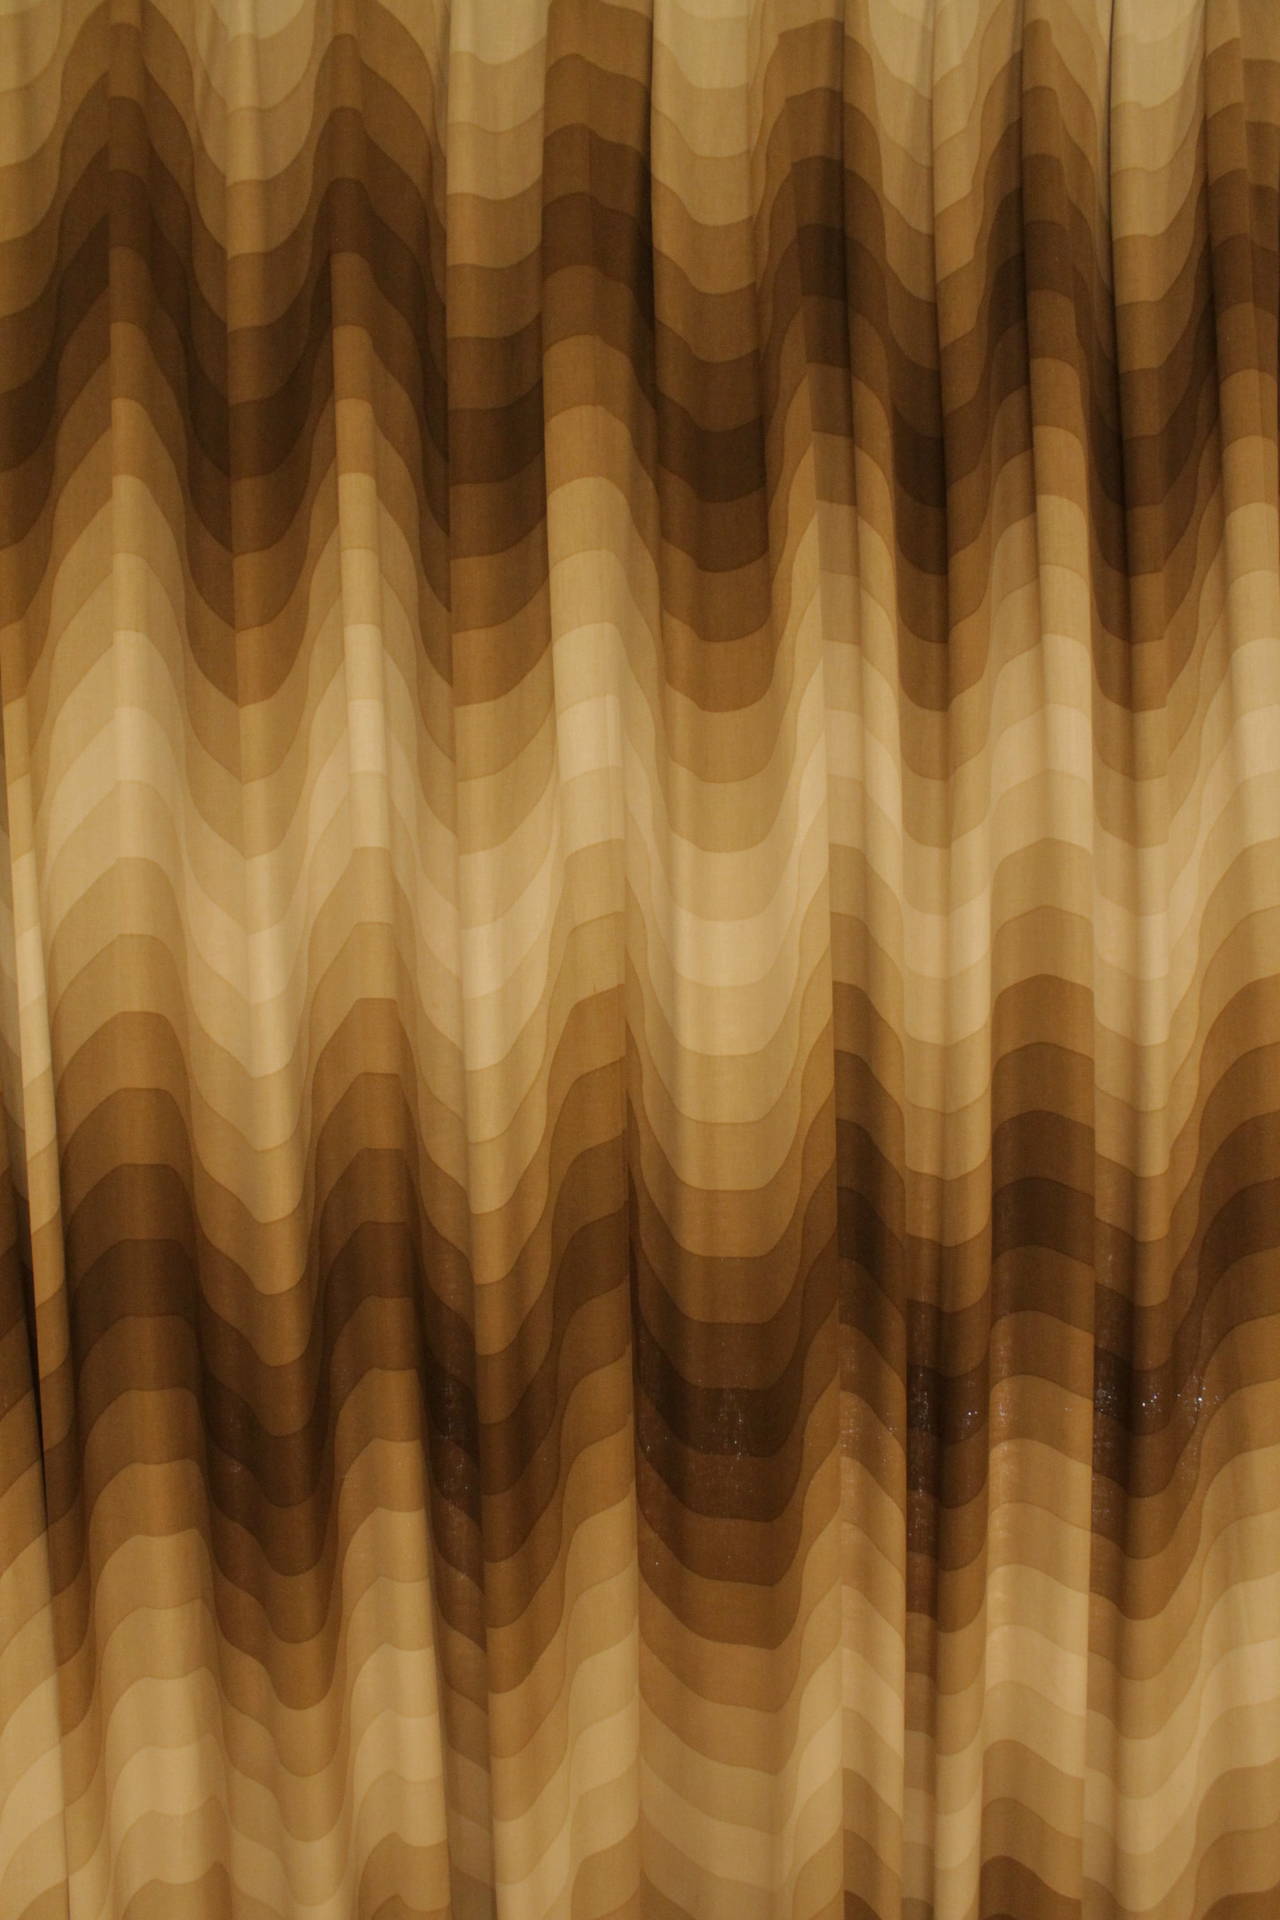 Pair of Middle Wave Mira X fabric curtains by Verner Panton 1973
Very good vintage condition, no fading.
Lined with brown fabric.
2 pieces of 175cm wide and 240cm high 
Ready to hang with this system ( picture 7 )
Signed